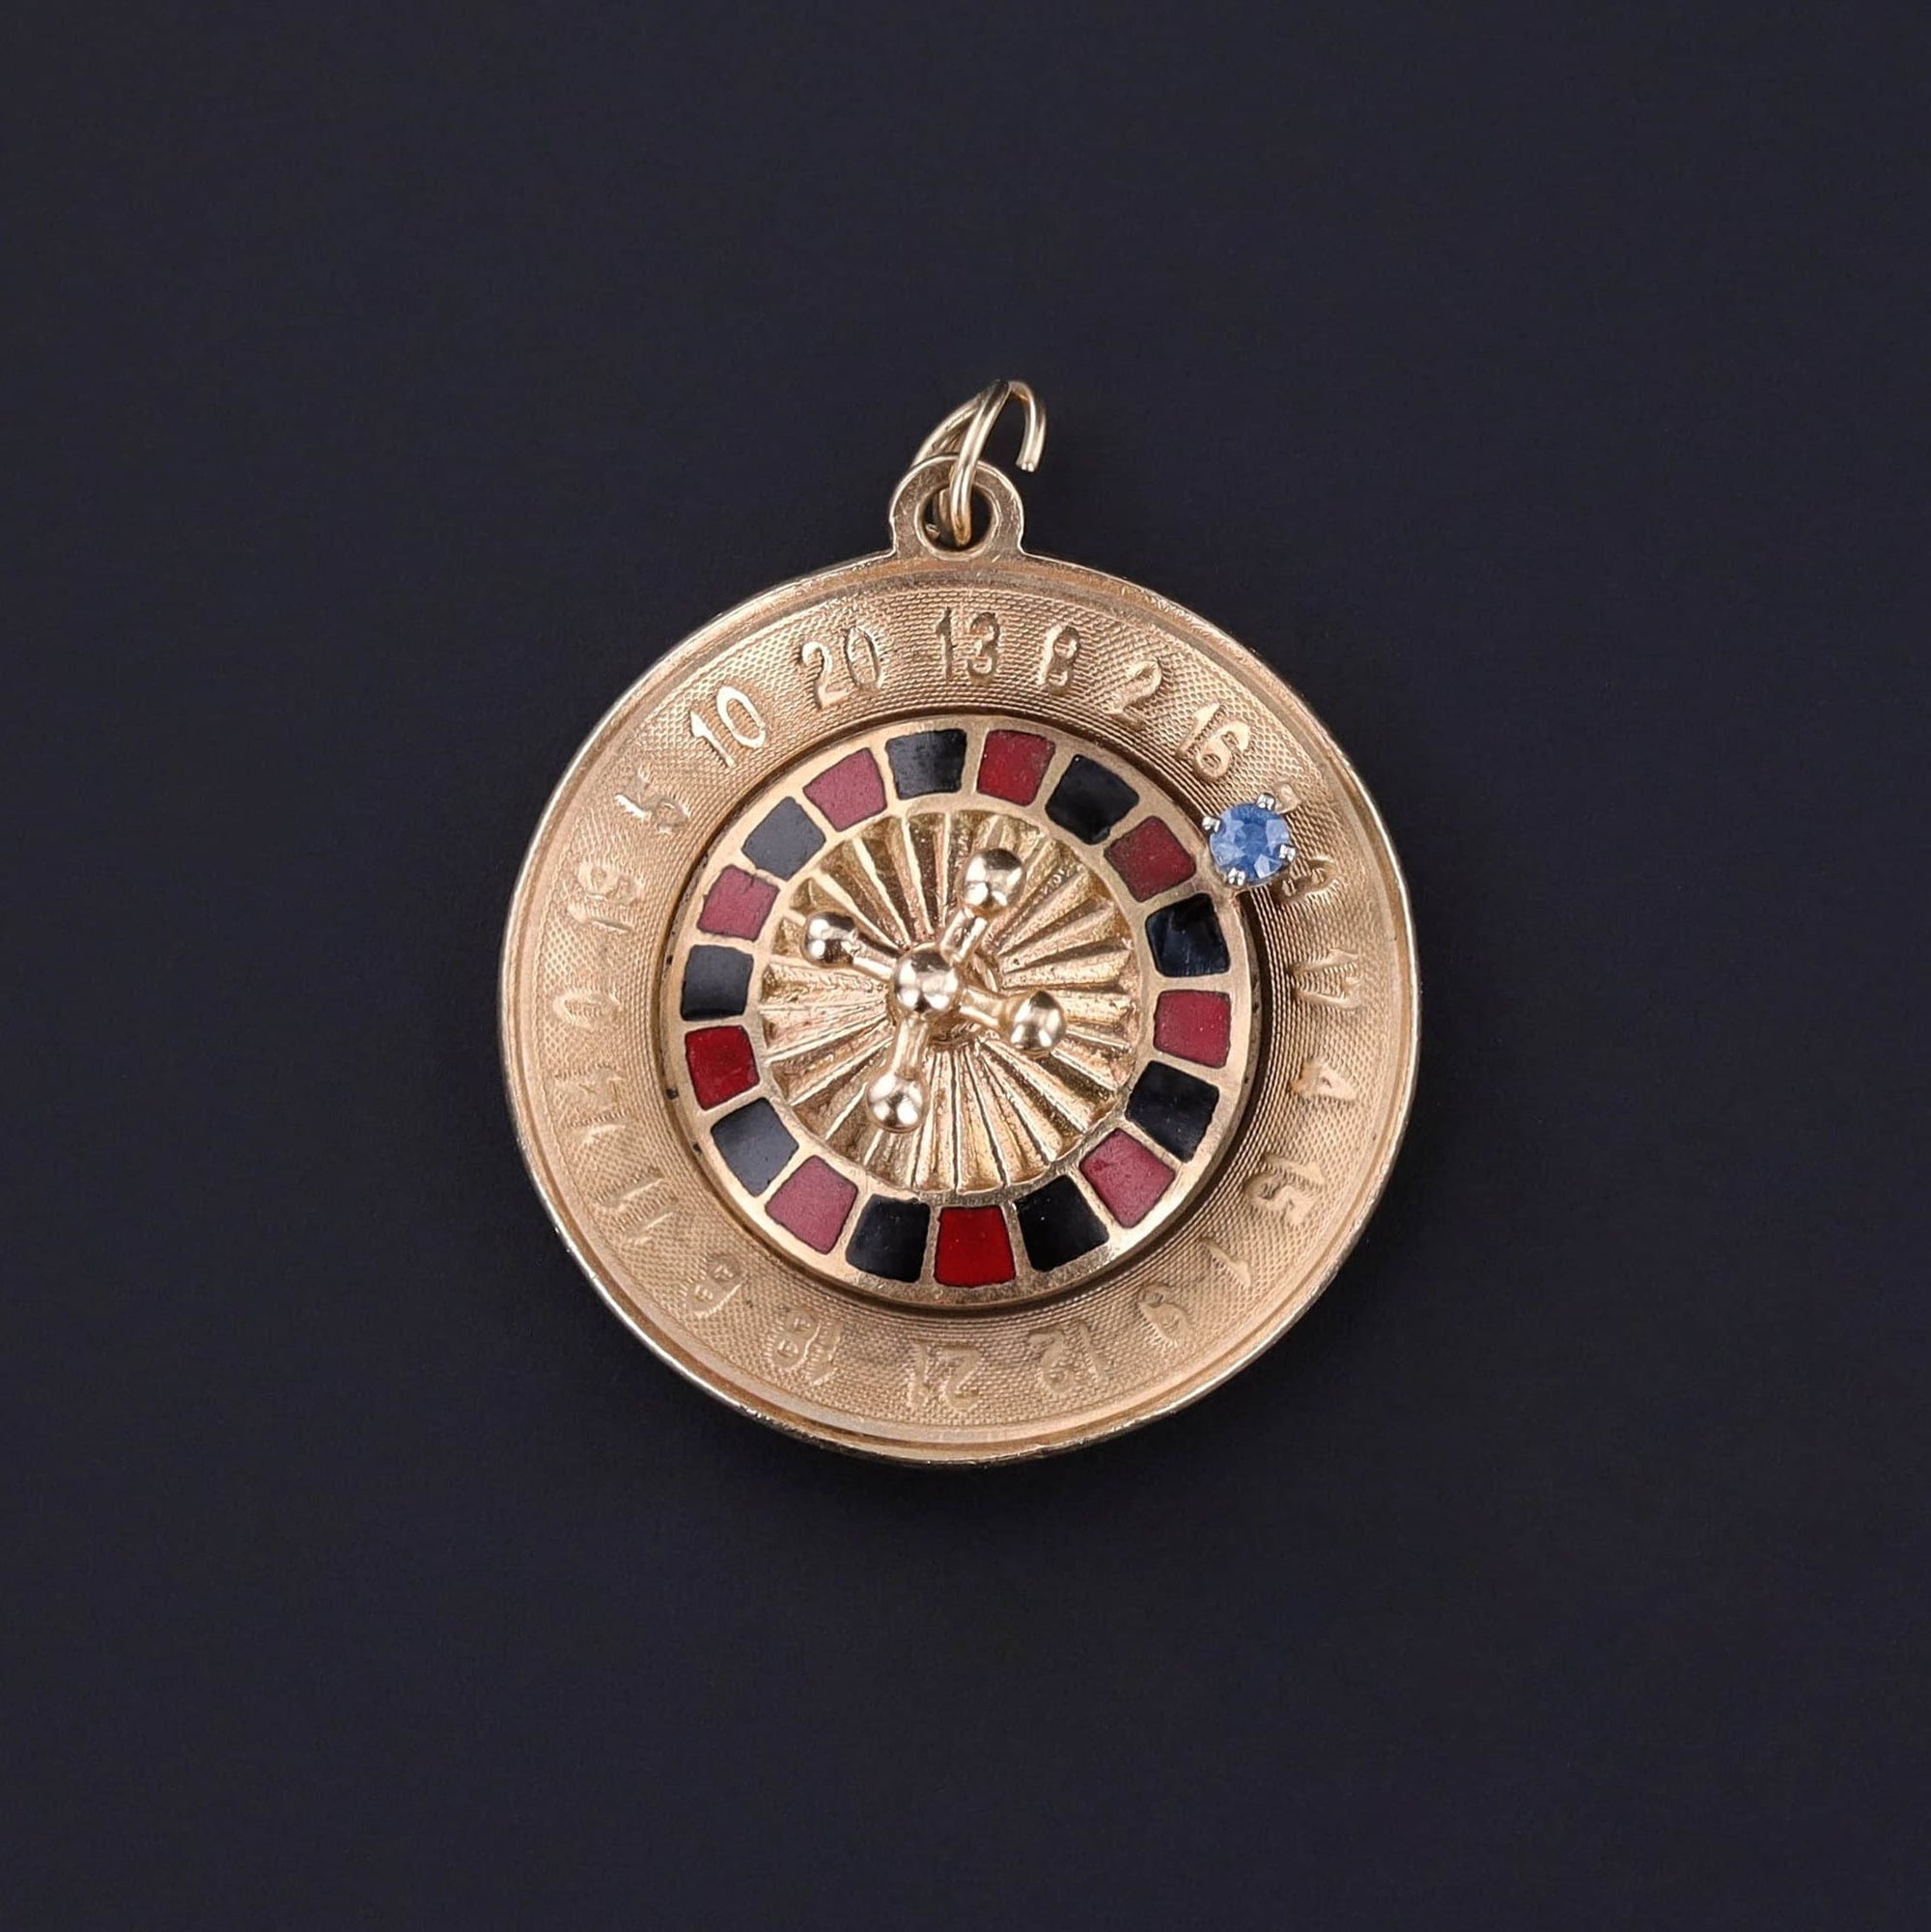 A perfect gift for a someone with a love of casinos or gambling. The 14k gold piece features a roulette wheel adorned with vibrant red and black enamel detailing and accented by a sparkling blue sapphire.